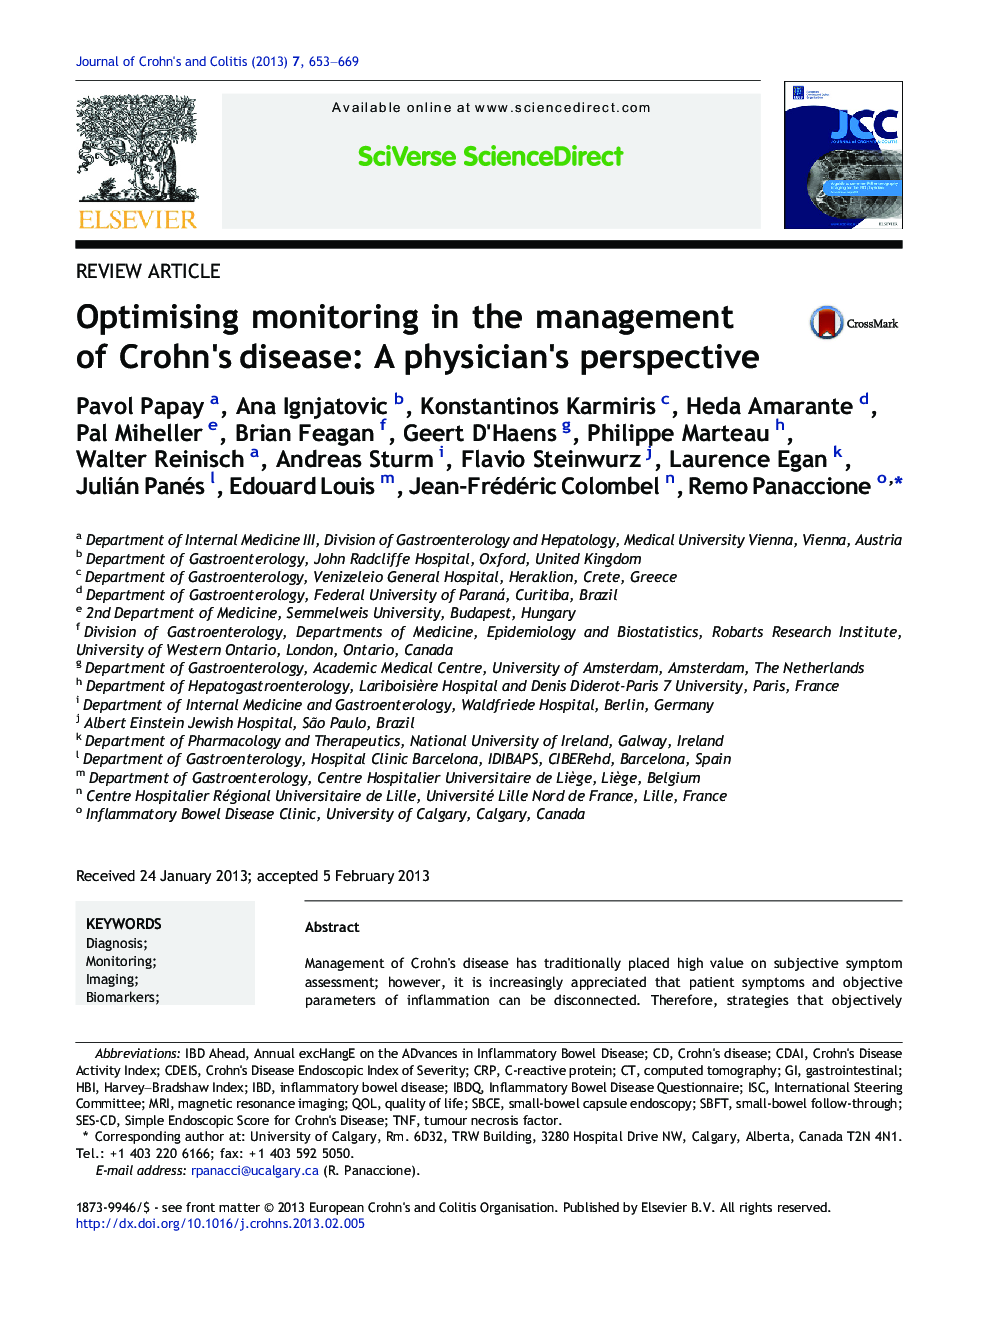 Review ArticleOptimising monitoring in the management of Crohn's disease: A physician's perspective